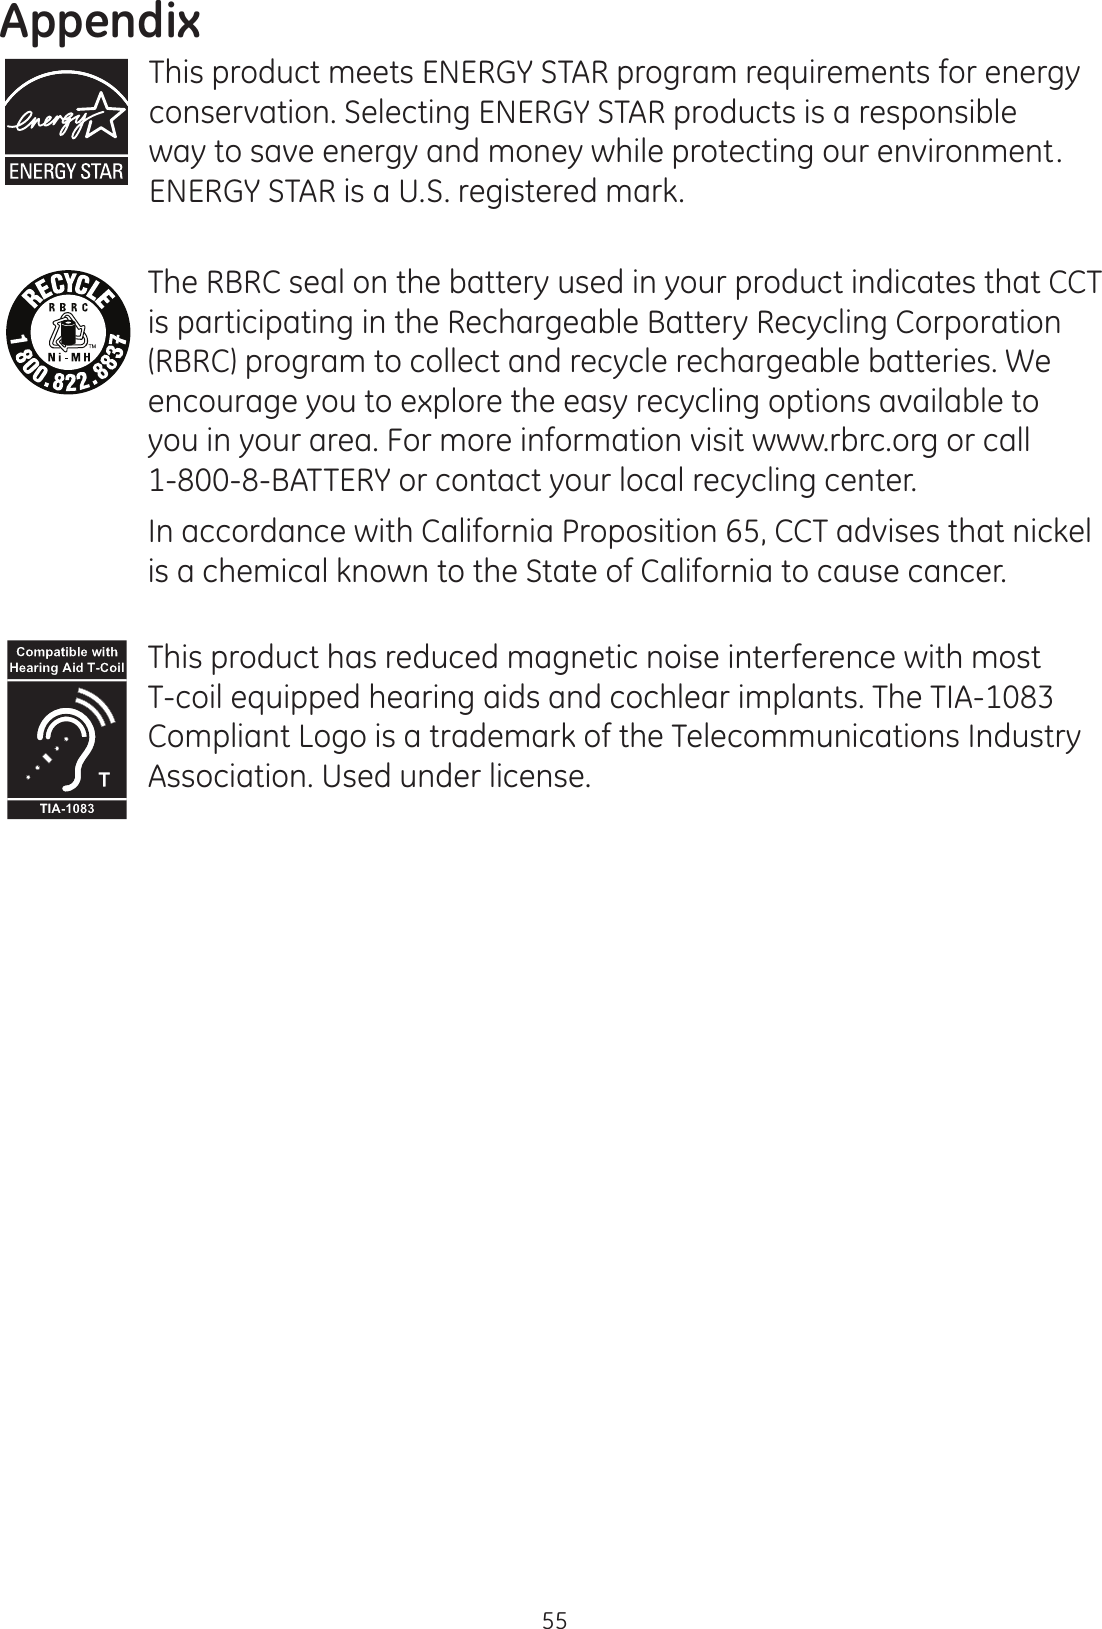 Appendix55This product meets ENERGY STAR program requirements for energy conservation. Selecting ENERGY STAR products is a responsible way to save energy and money while protecting our environment. ENERGY STAR is a U.S. registered mark.The RBRC seal on the battery used in your product indicates that CCT is participating in the Rechargeable Battery Recycling Corporation (RBRC) program to collect and recycle rechargeable batteries. We encourage you to explore the easy recycling options available to you in your area. For more information visit www.rbrc.org or call 1-800-8-BATTERY or contact your local recycling center.In accordance with California Proposition 65, CCT advises that nickel is a chemical known to the State of California to cause cancer.This product has reduced magnetic noise interference with most T-coil equipped hearing aids and cochlear implants. The TIA-1083 Compliant Logo is a trademark of the Telecommunications Industry Association. Used under license.